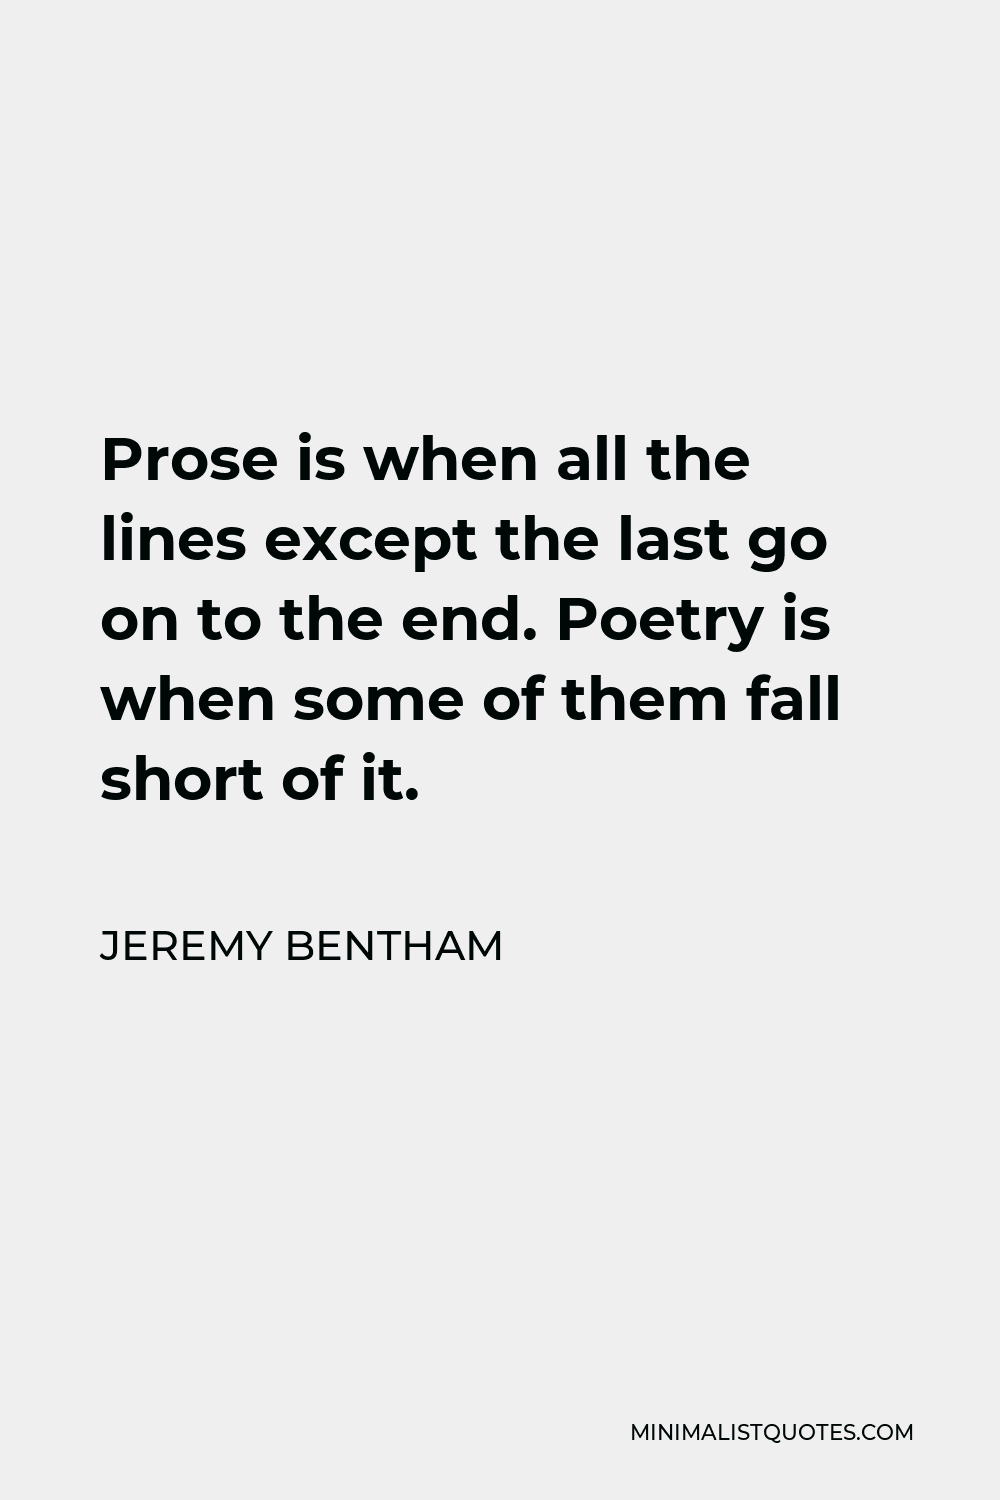 Jeremy Bentham Quote - Prose is when all the lines except the last go on to the end. Poetry is when some of them fall short of it.